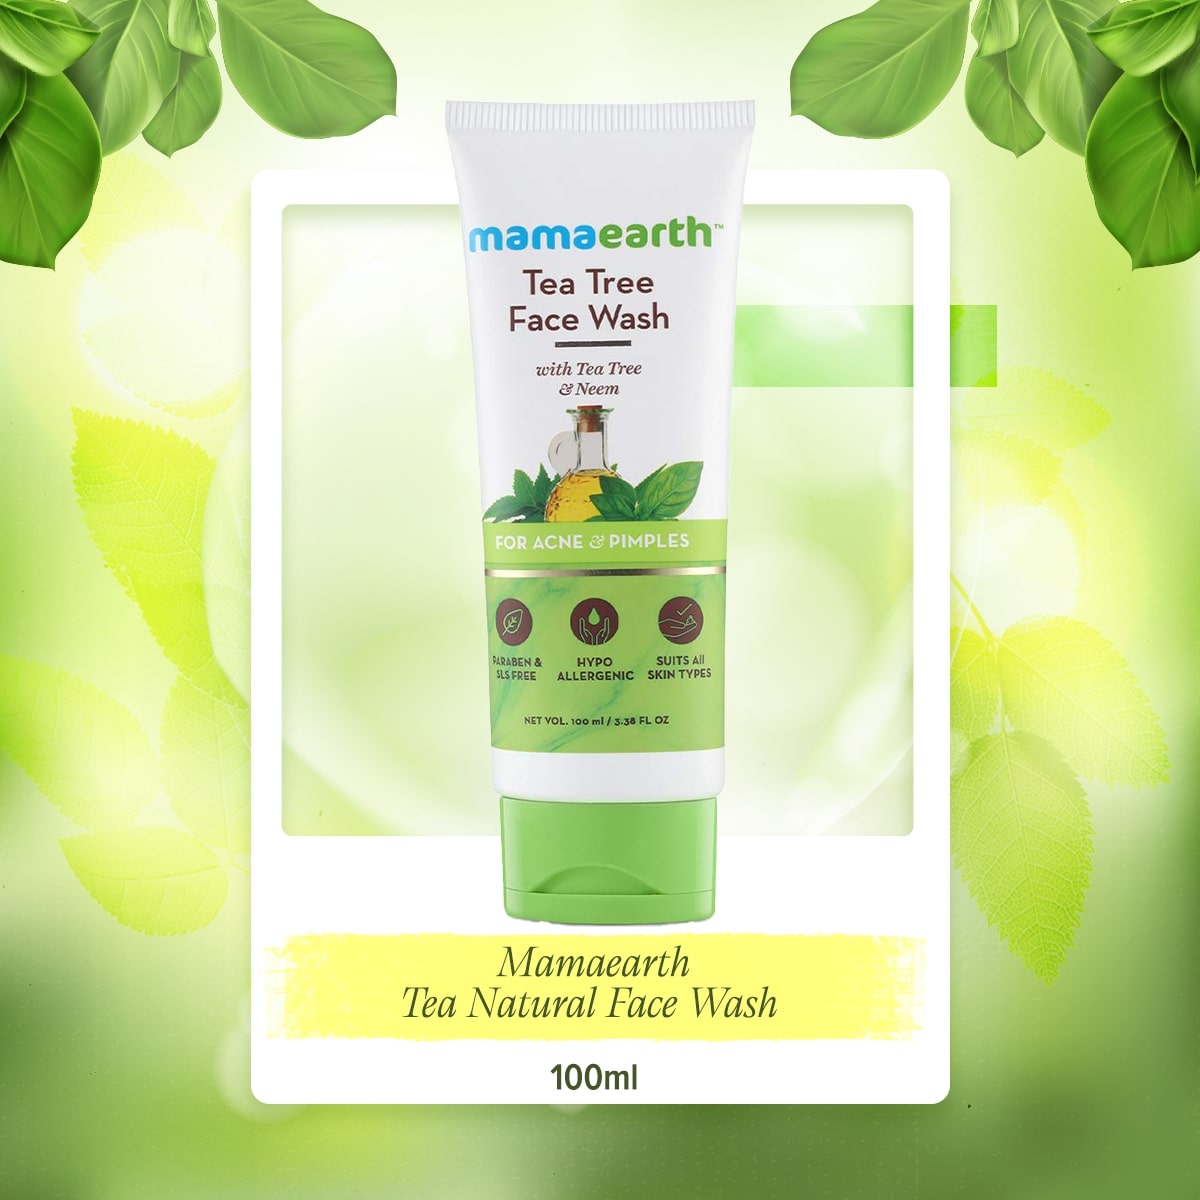 Mamaearth Tea Natural For Acne Pimples Wash Ml Price In Bangladesh